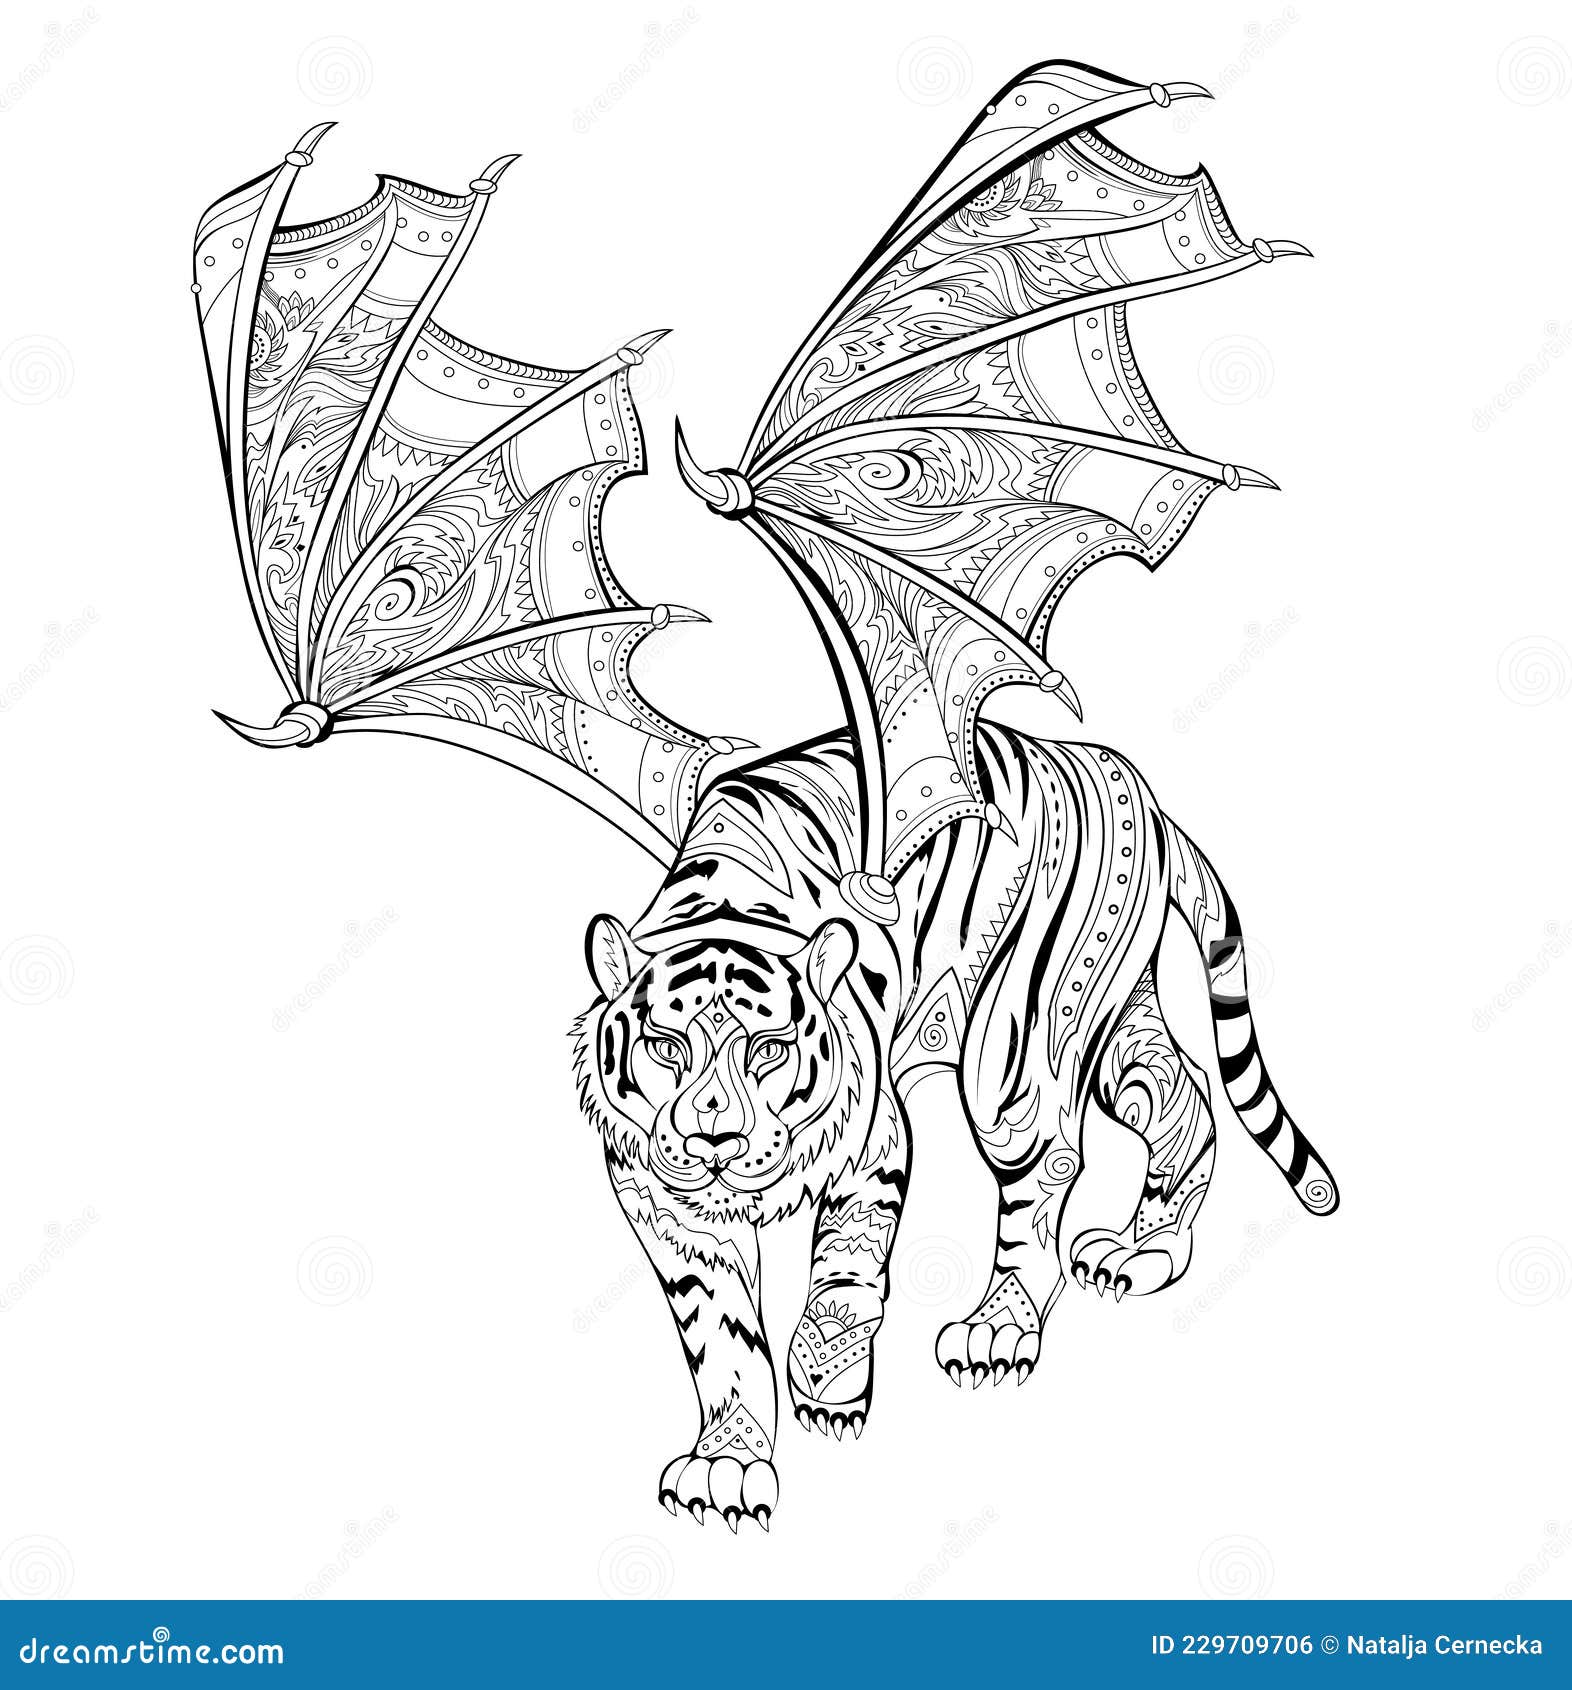 Fantastic warlike tiger with wings coloring book printable image for logo tattoo jewelry decoration print stock vector